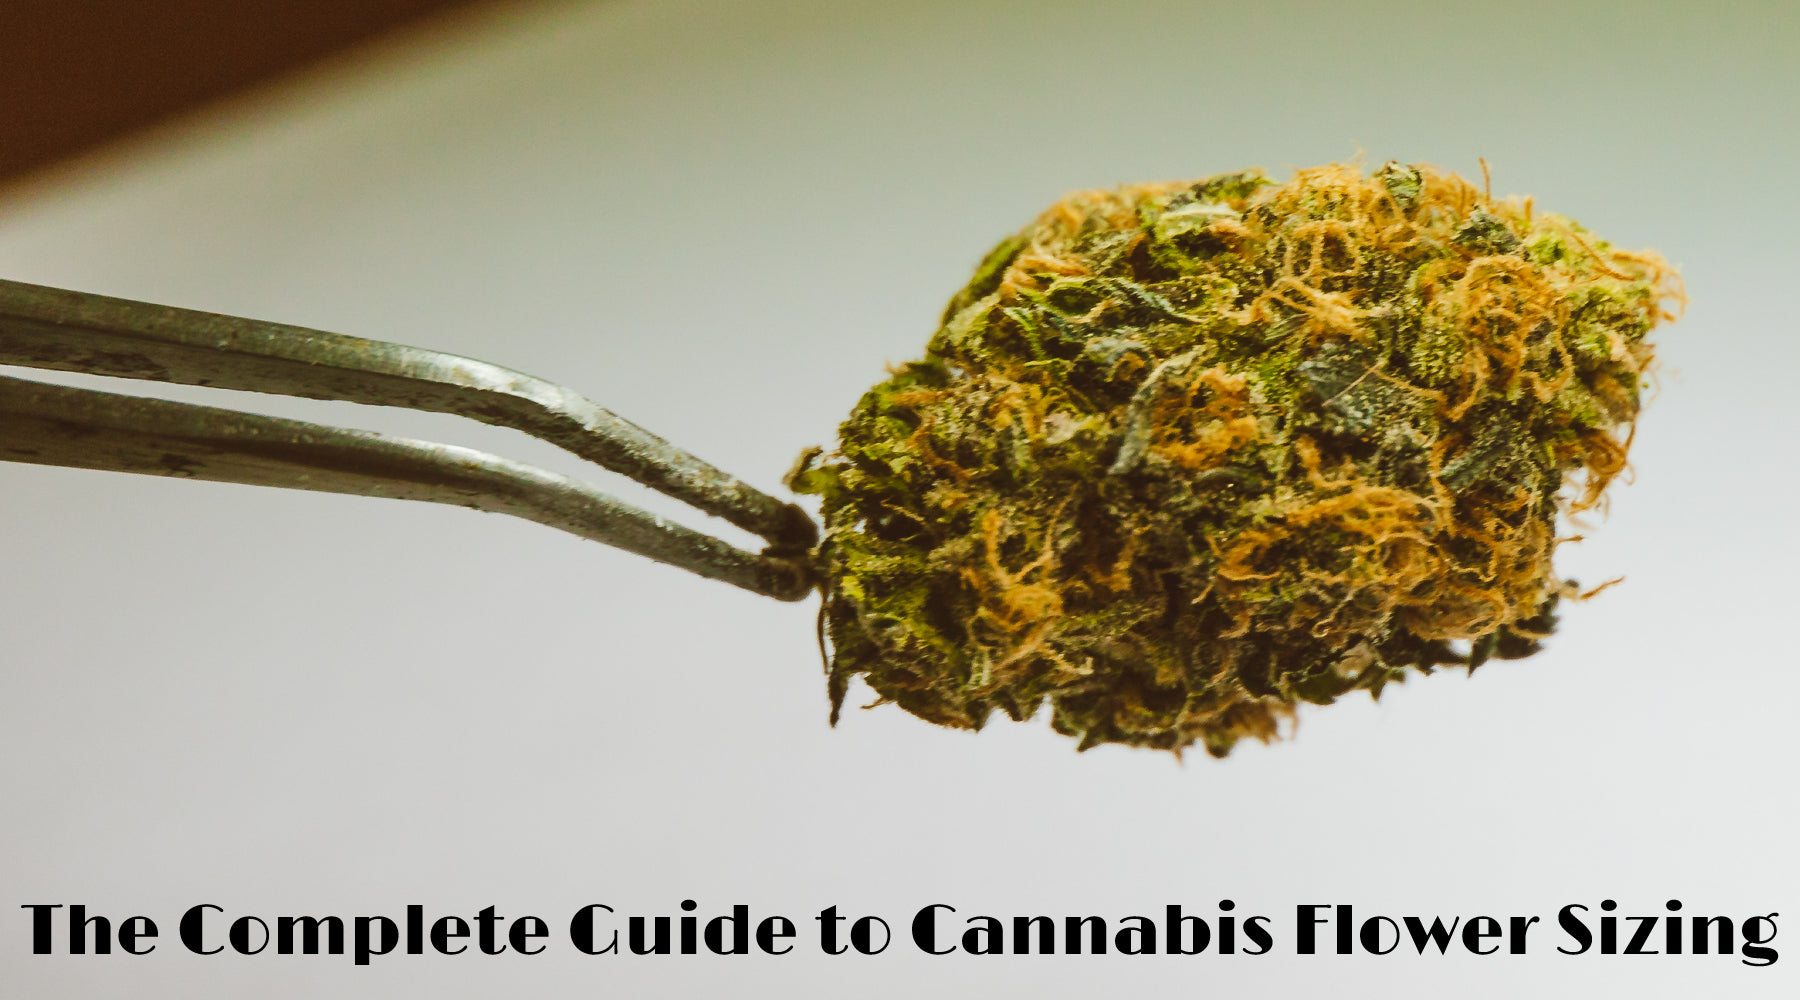 Guide to Cannabis Flower Sizing